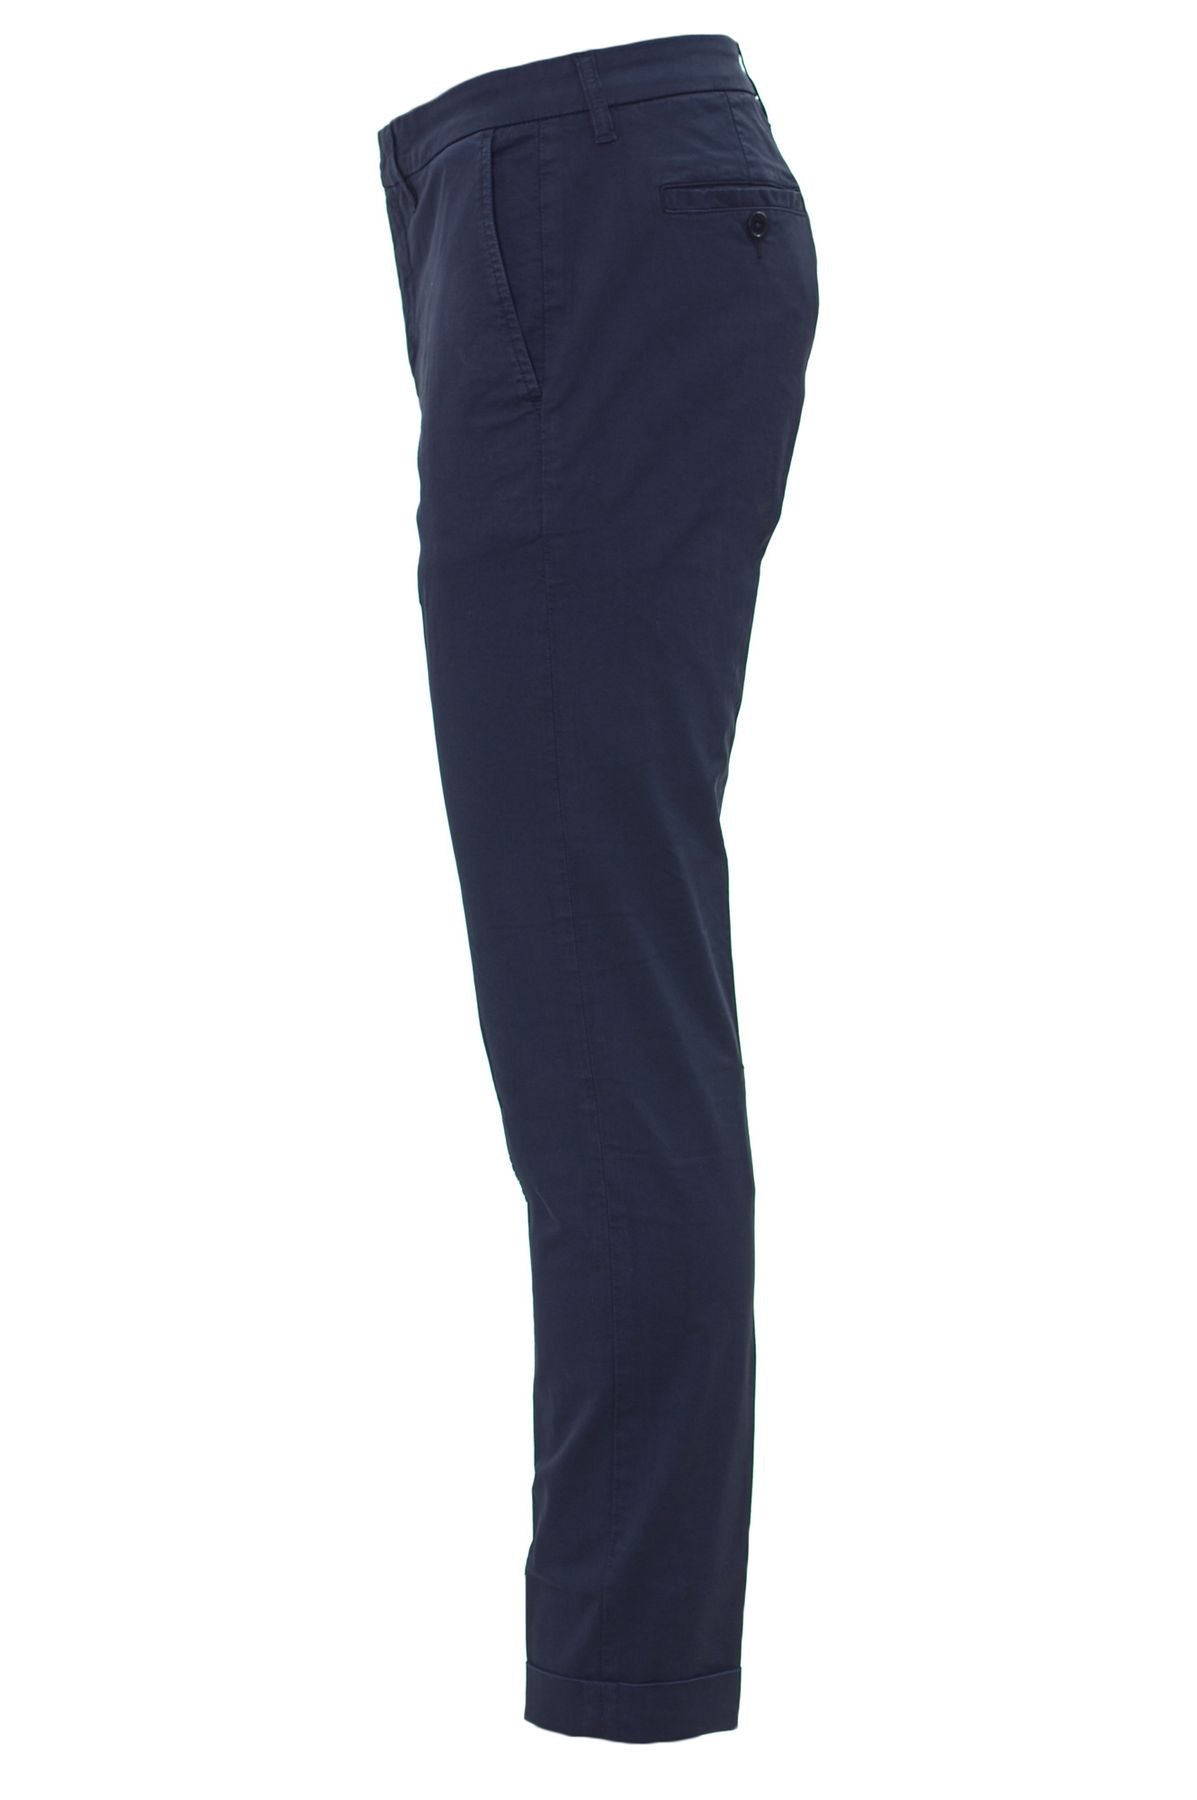 FAY Spring/Summer Cotton Trousers